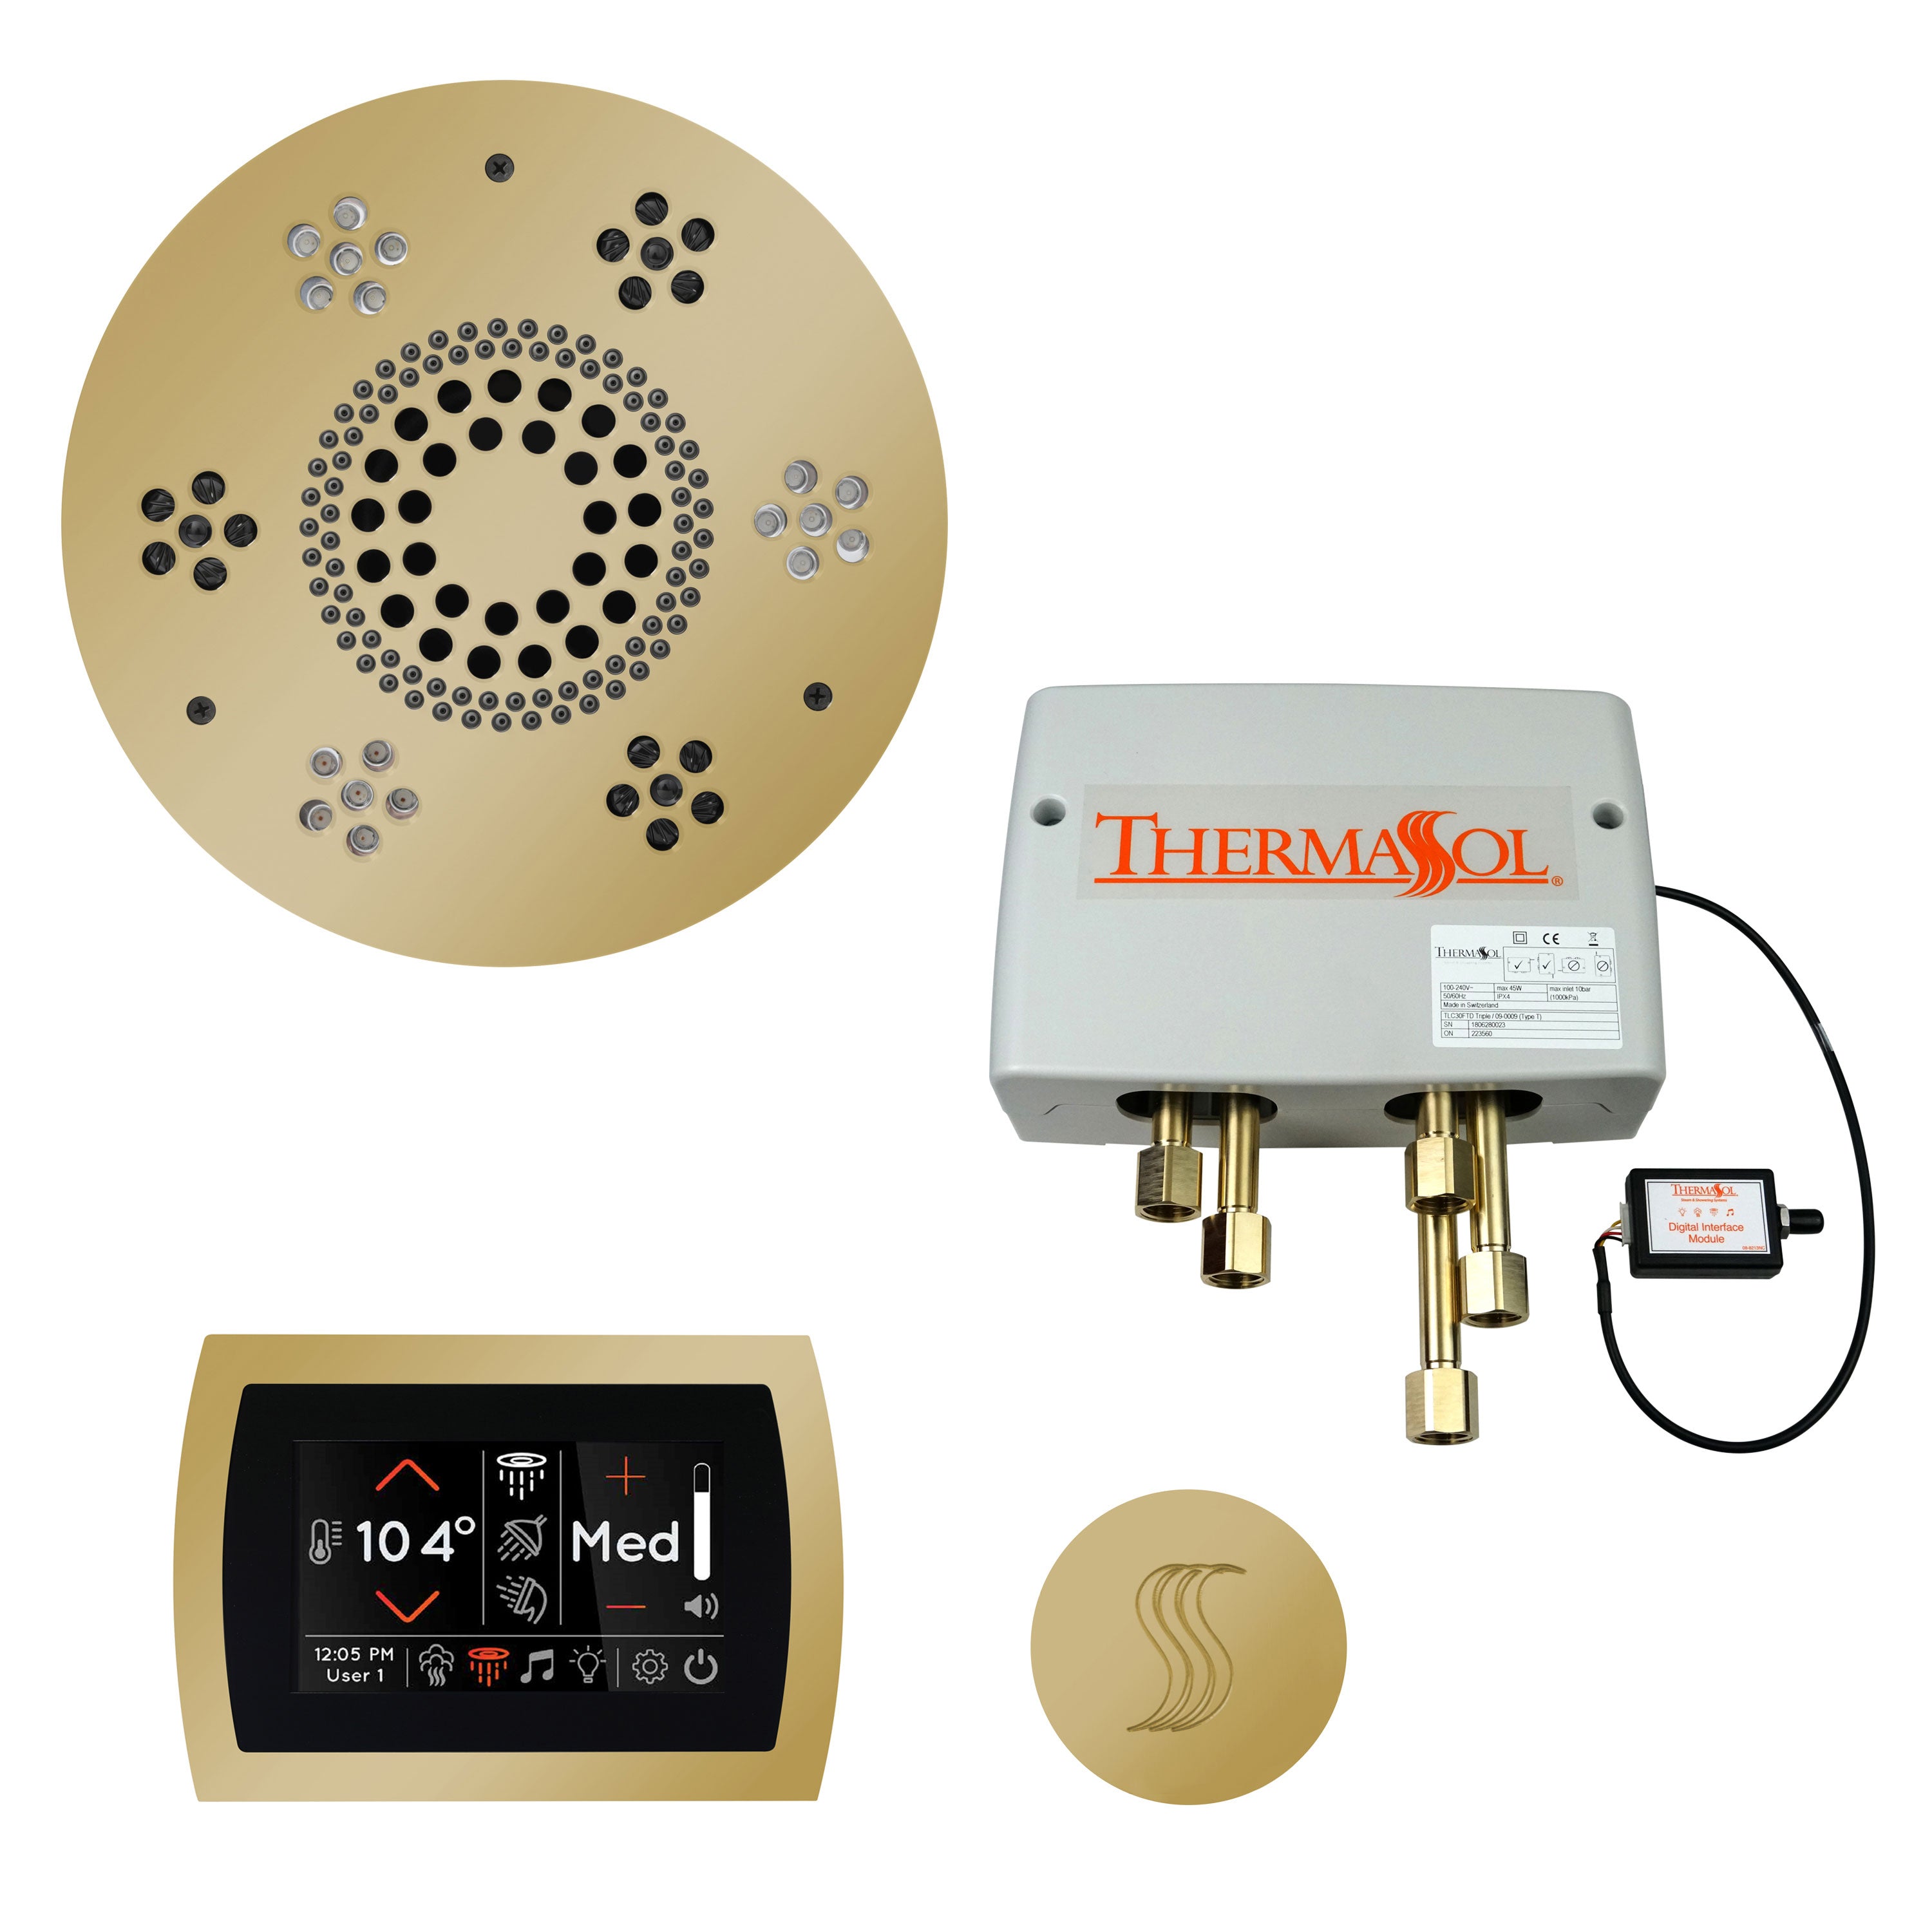 ThermaSol Steam Shower Kit - The Total Wellness Package with SignaTouch